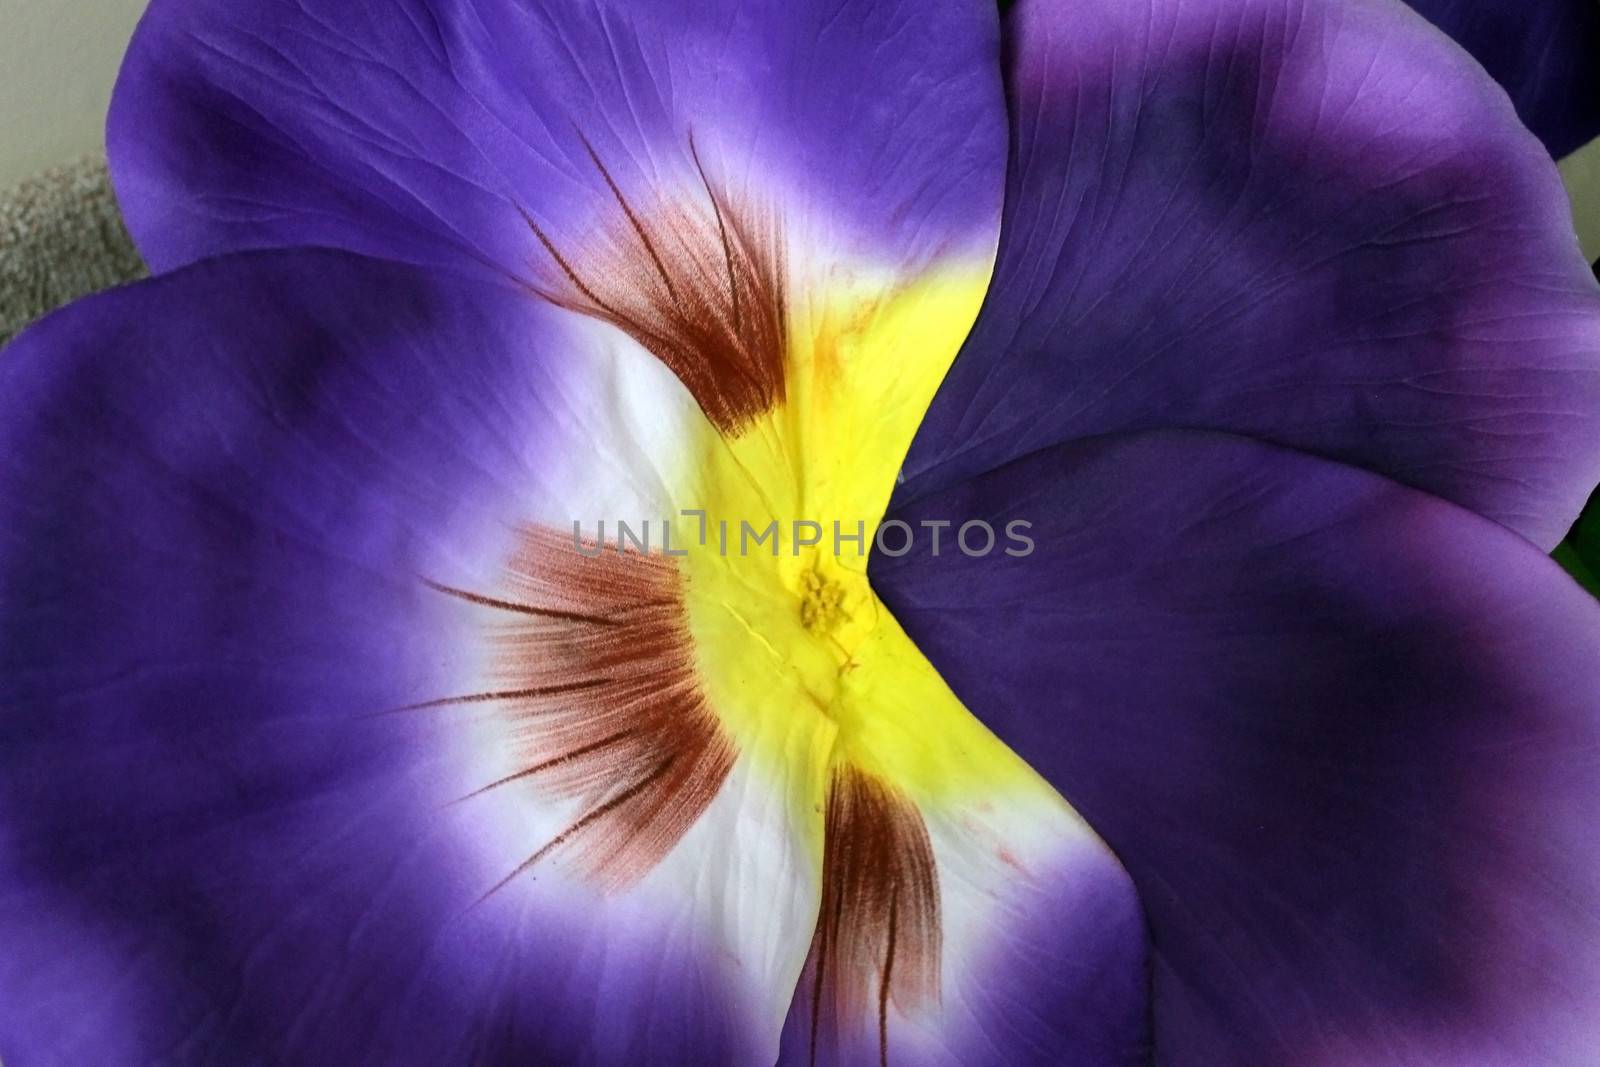 pansy background by hicster